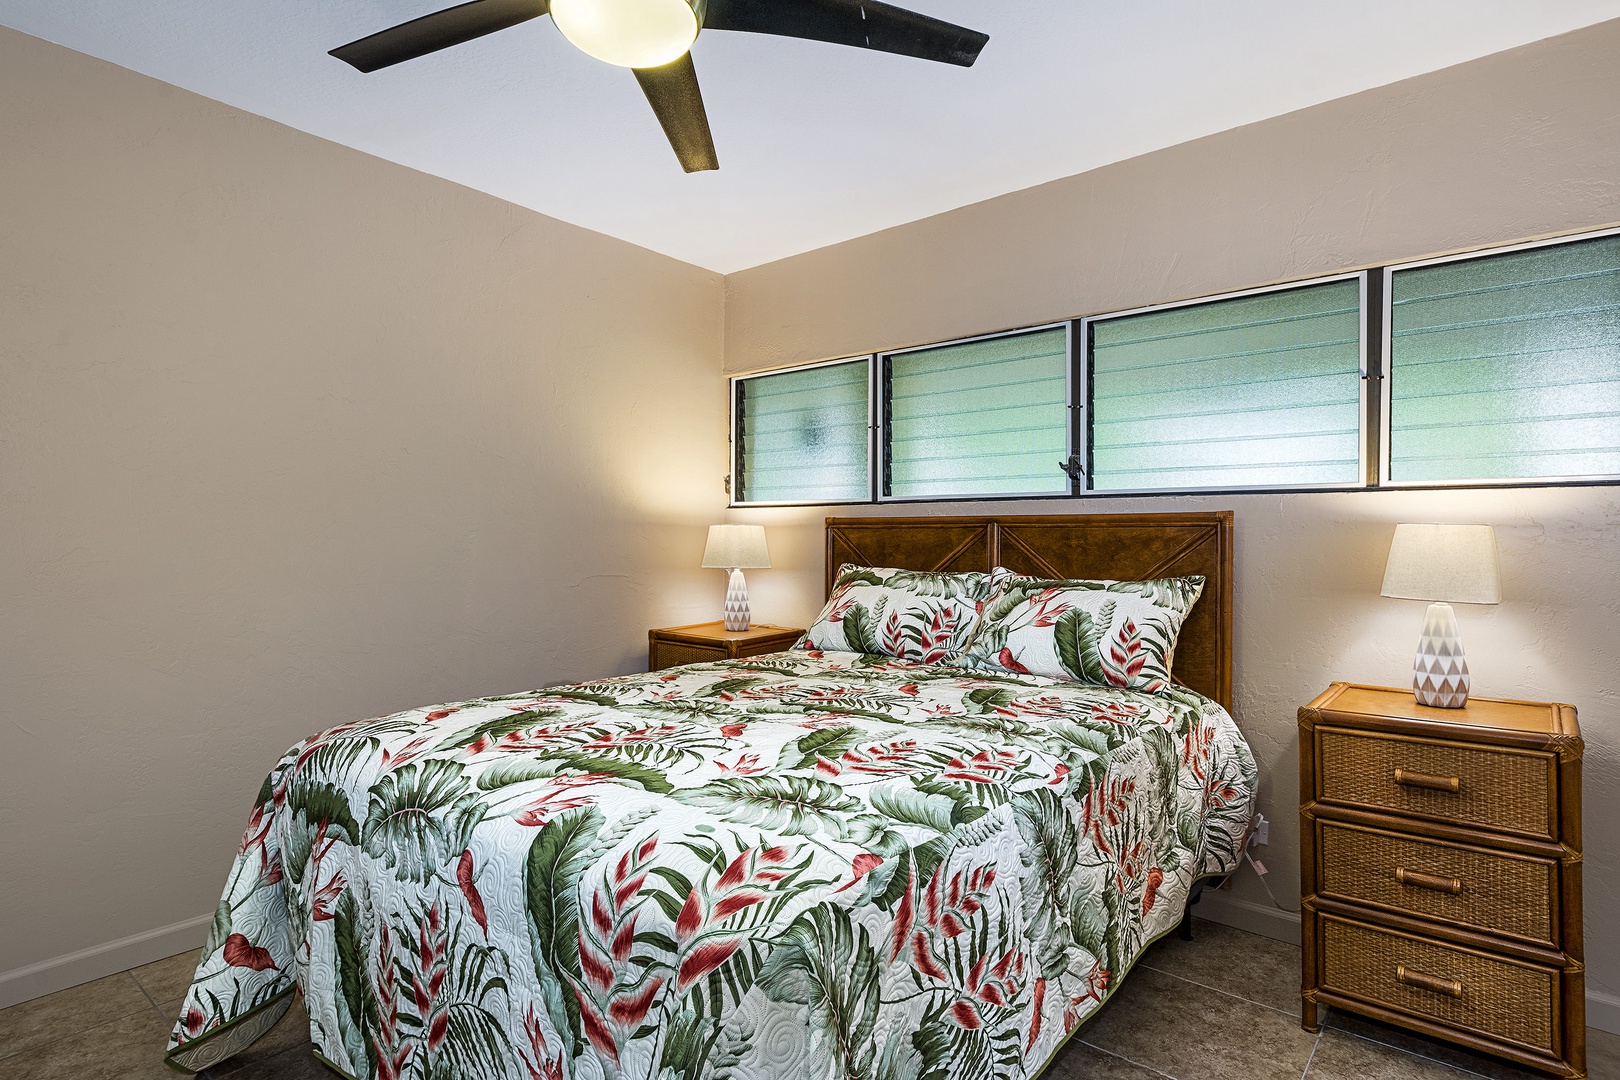 Kailua Kona Vacation Rentals, Kalanikai 306 - Bedroom equipped with Queen bed, and A/C